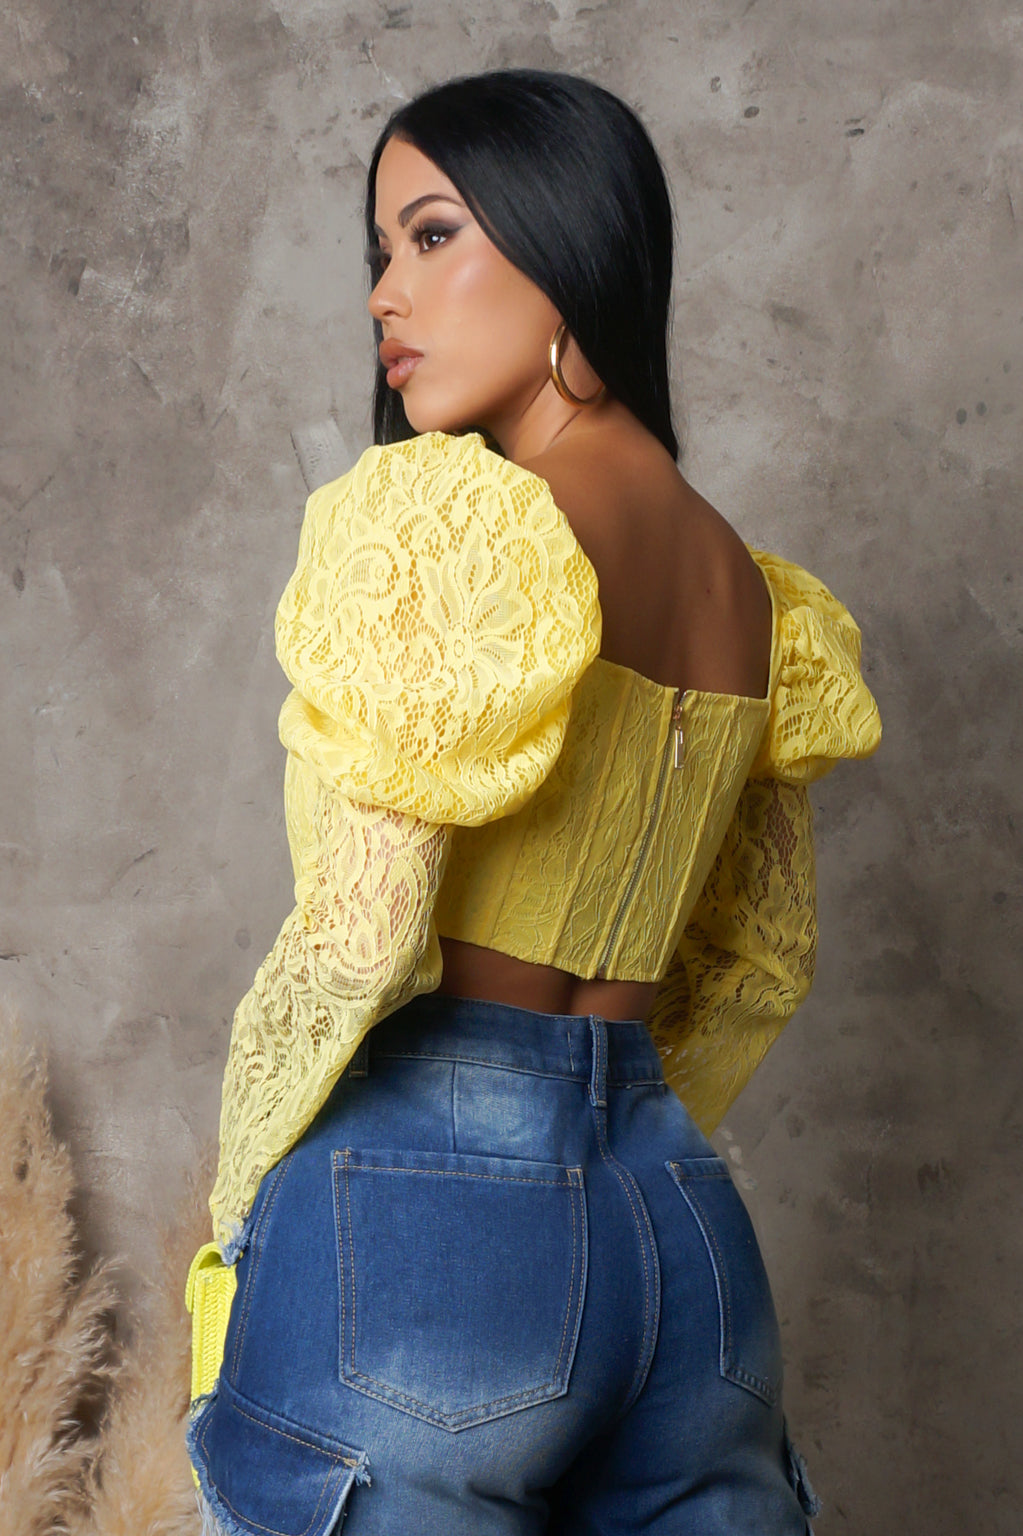 New To This Crop Top - Yellow